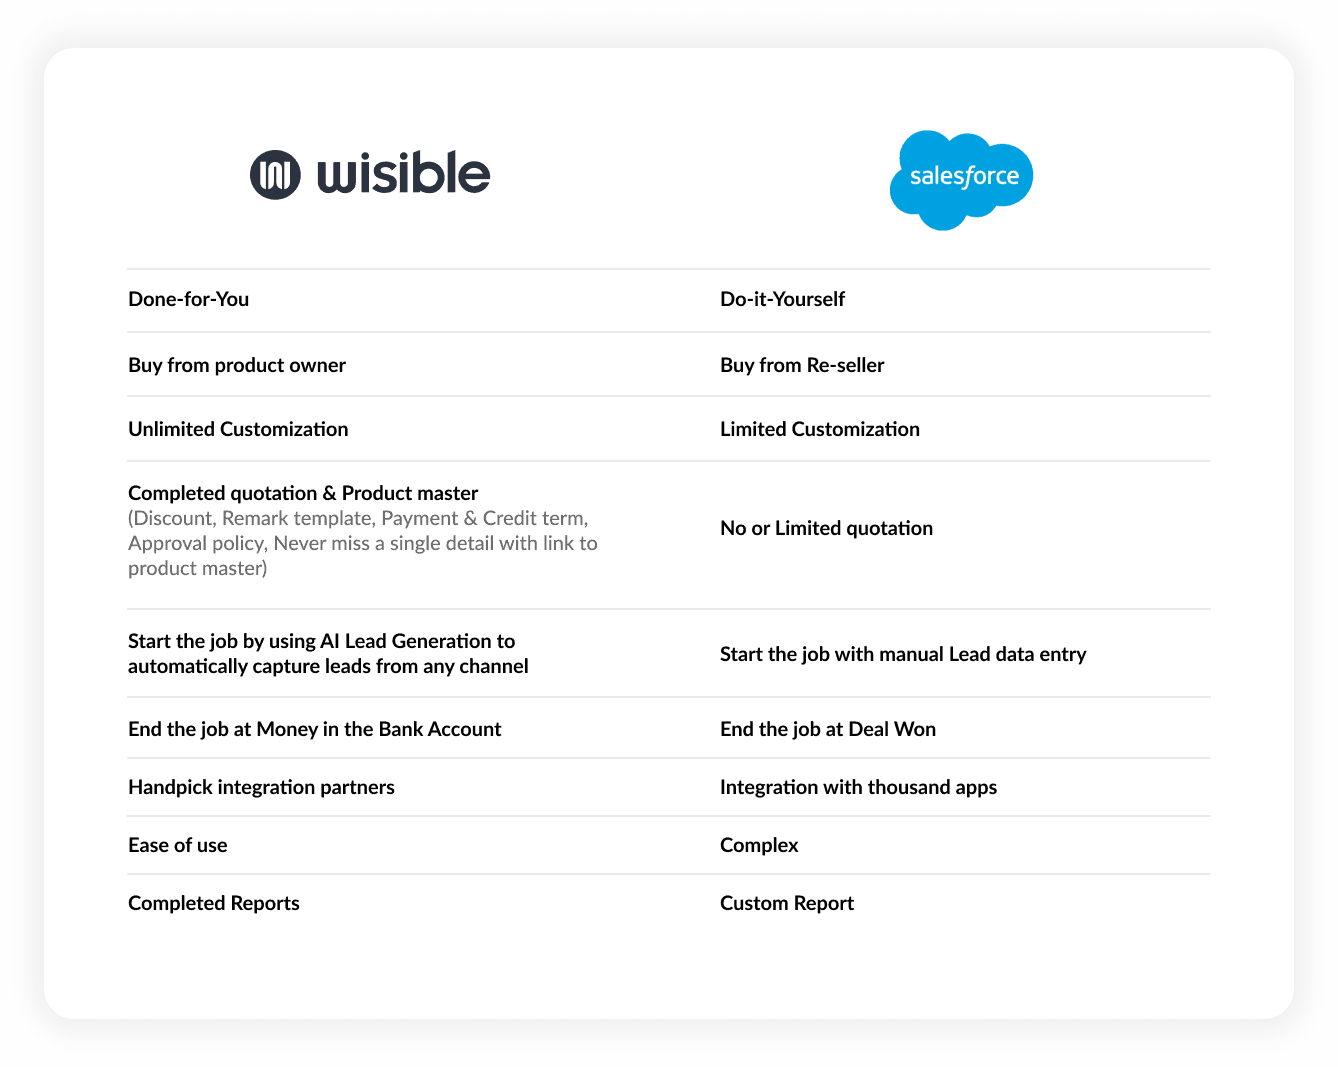 Wisible vs Salesforce